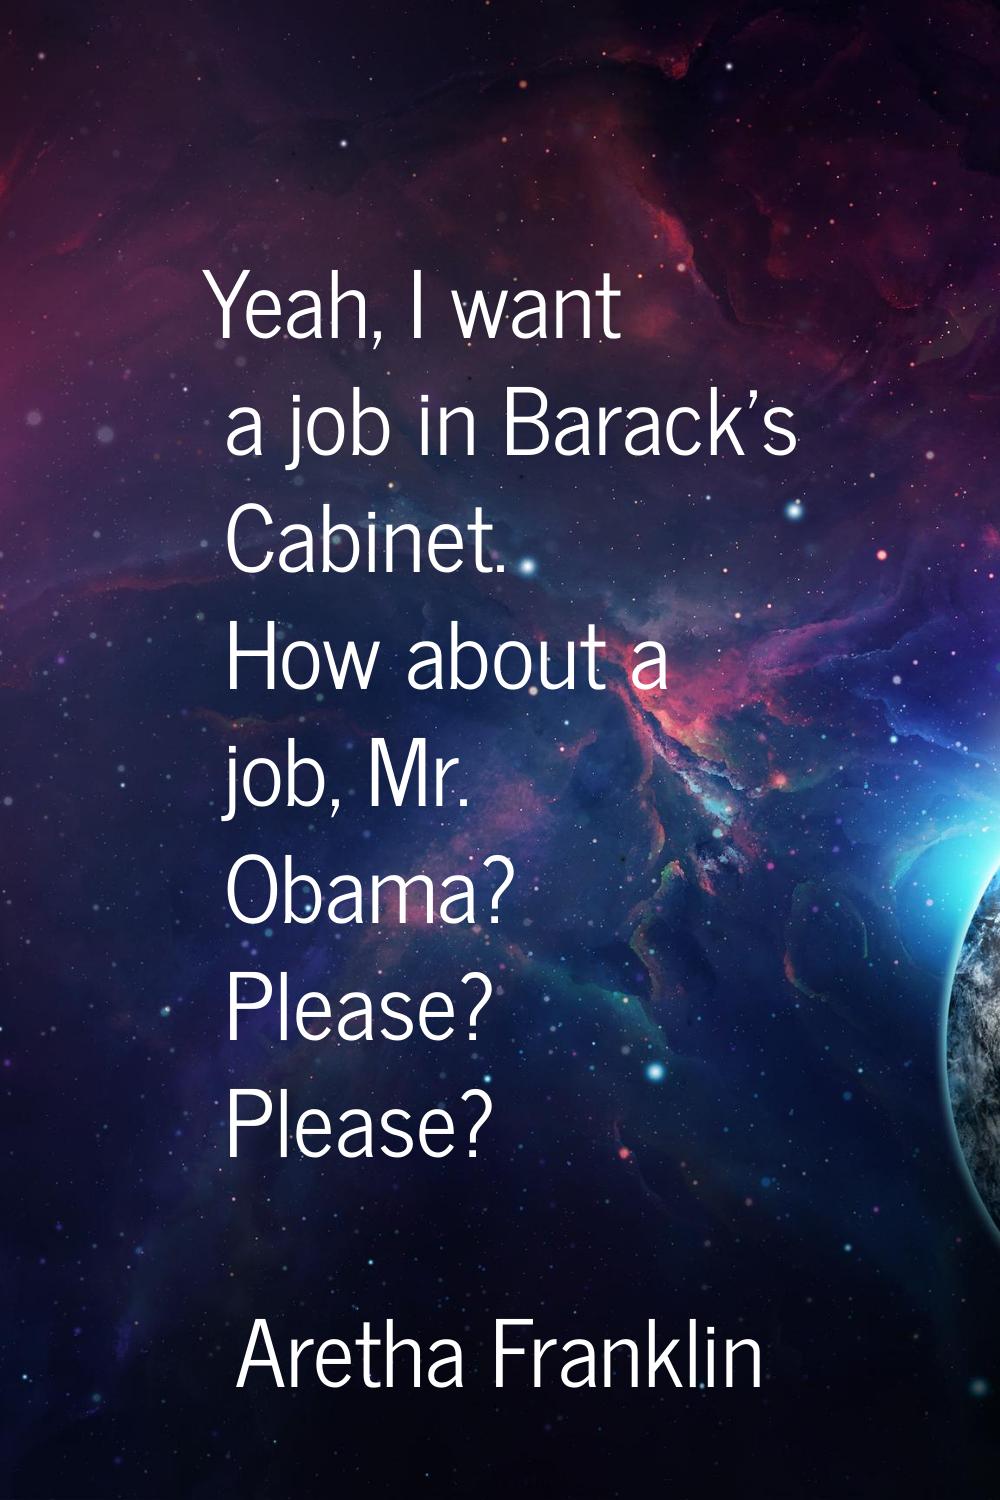 Yeah, I want a job in Barack's Cabinet. How about a job, Mr. Obama? Please? Please?